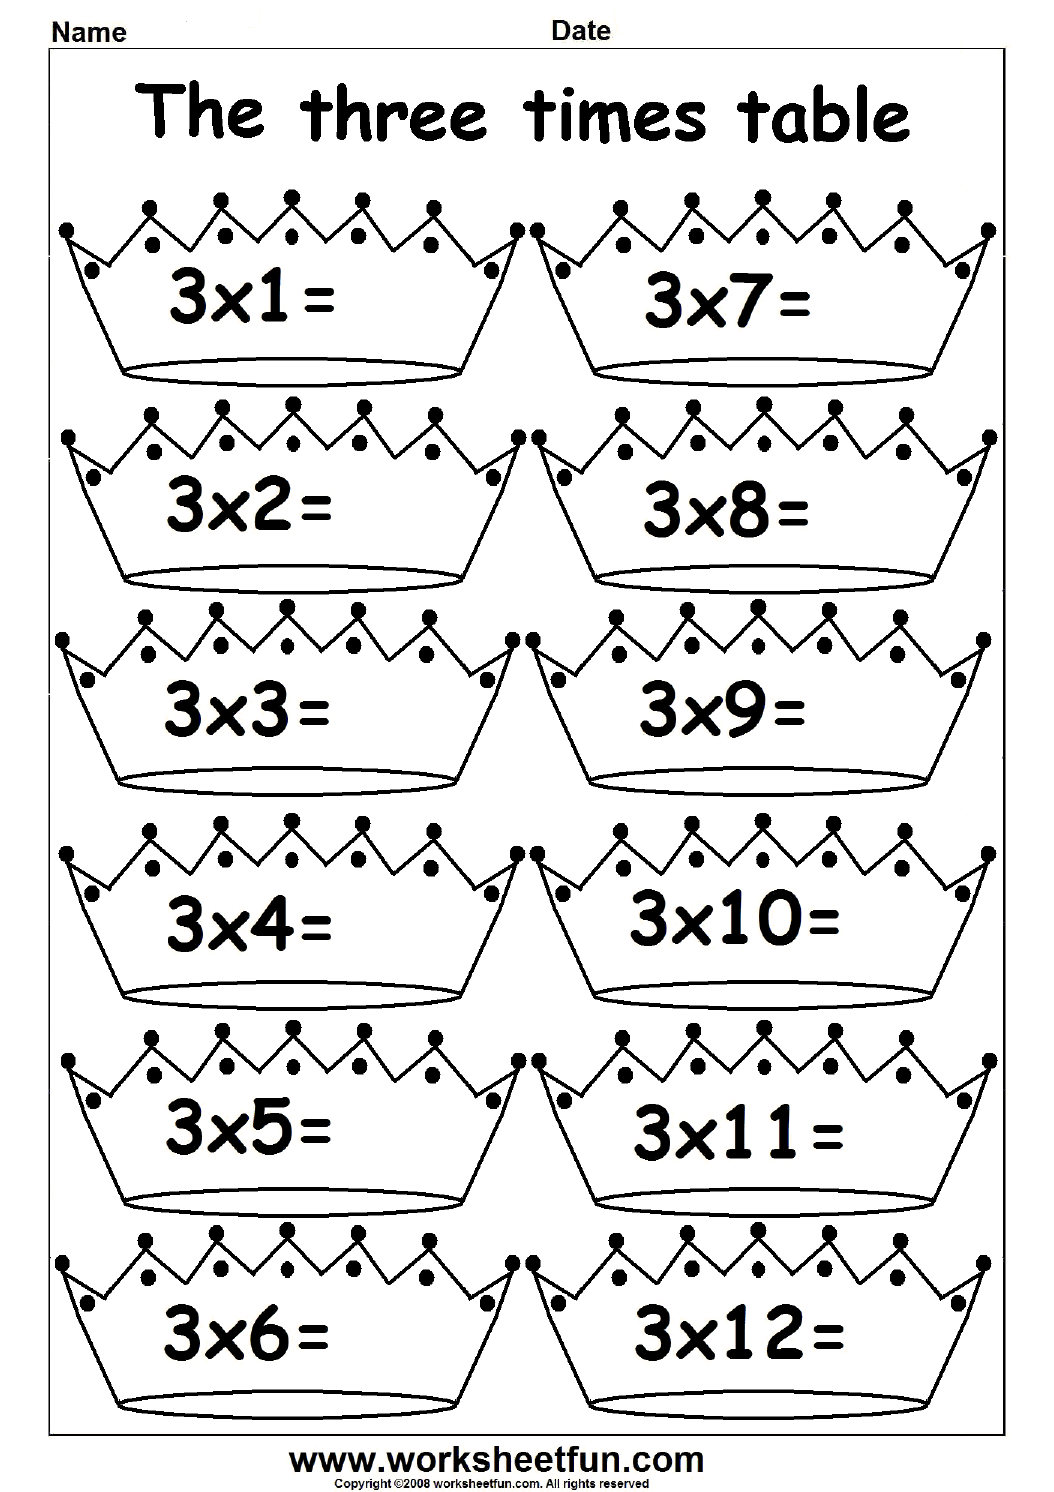 2, 3, 4, 5, 6, 7, 8, 9, 10, 11 and 12 Times Table Fun times table